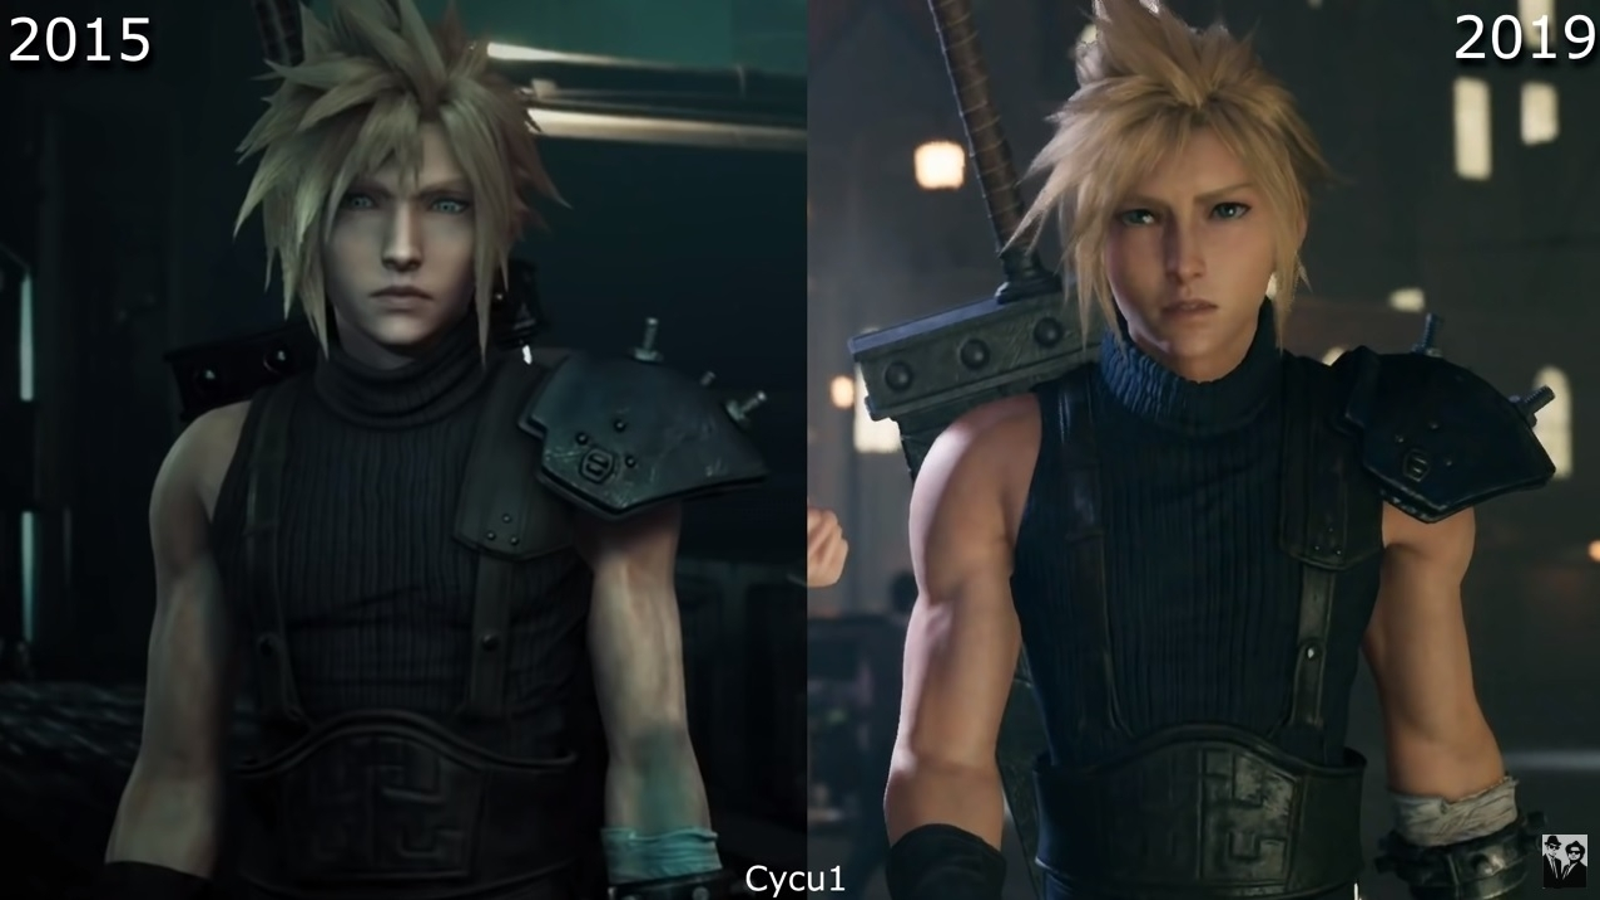 PlayStation Experience 2015: Final Fantasy VII Remake - PSX 2015